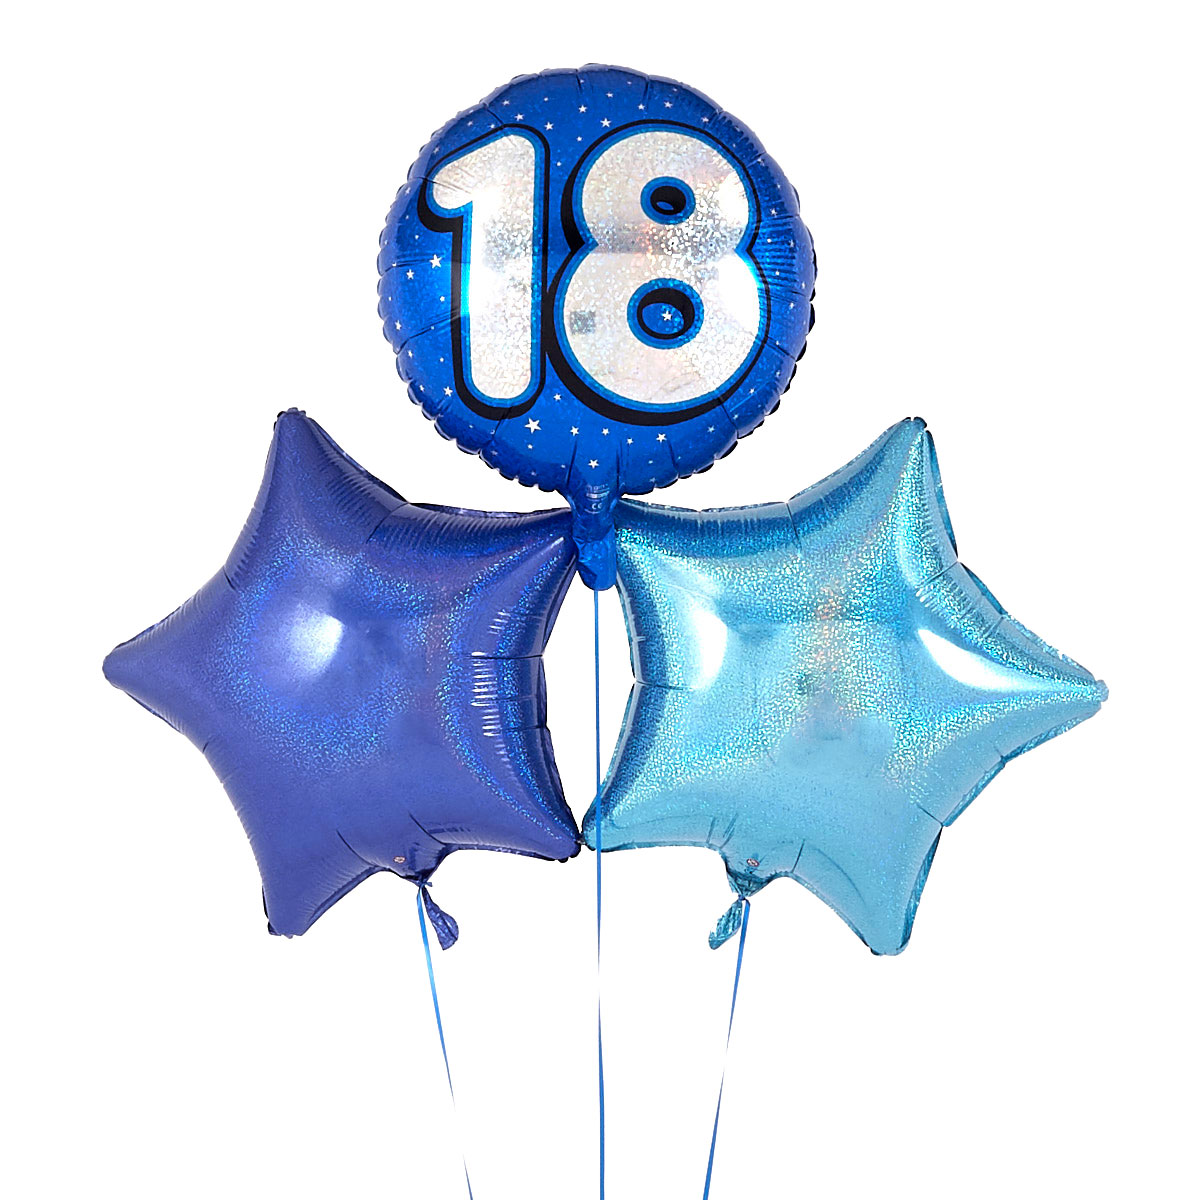 Blue 18th Birthday Balloon Bouquet - DELIVERED INFLATED!